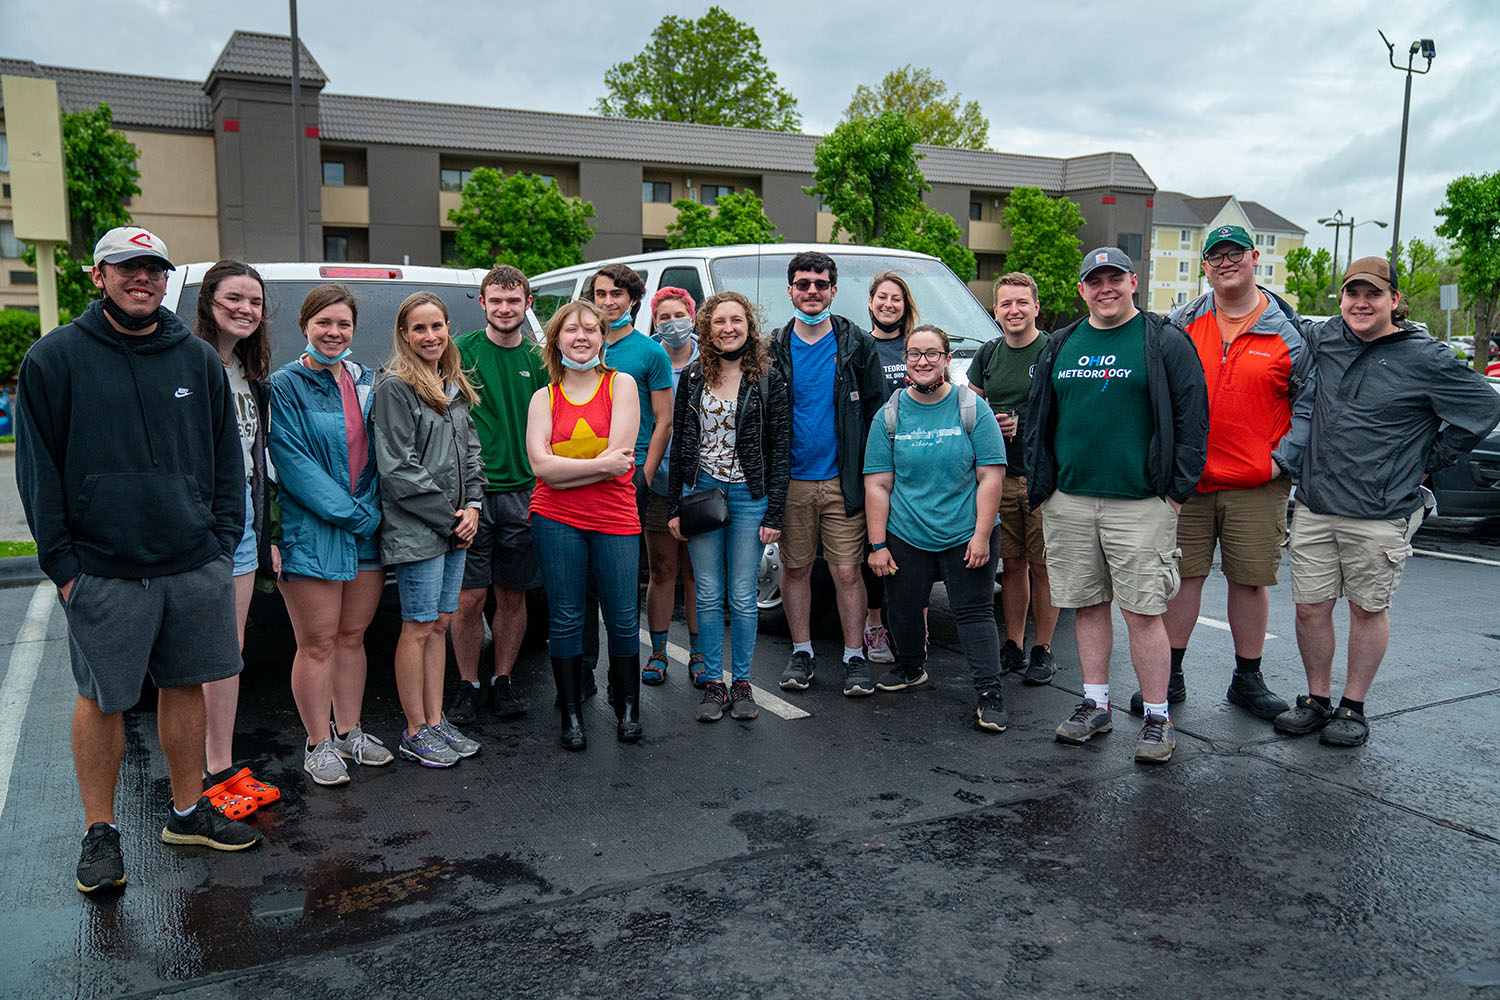 A total of 15 students went on the trip, including 13 undergraduate students ranging from first years to graduating seniors and two graduate students. From left to right:  Adam Eckman, Ashlee Ziegler, Emily Dietz, Dr. Jana Houser, Elijah Paciorek, Lauren Warner, James Zinnbauer, Hunter Uhl, Eden Koval, Nathan Kuhr, Darby Johnson, Sydney Walters, Chris Ford, Jacob Van Cleave, Cameron Cousino and Colby Bryan.